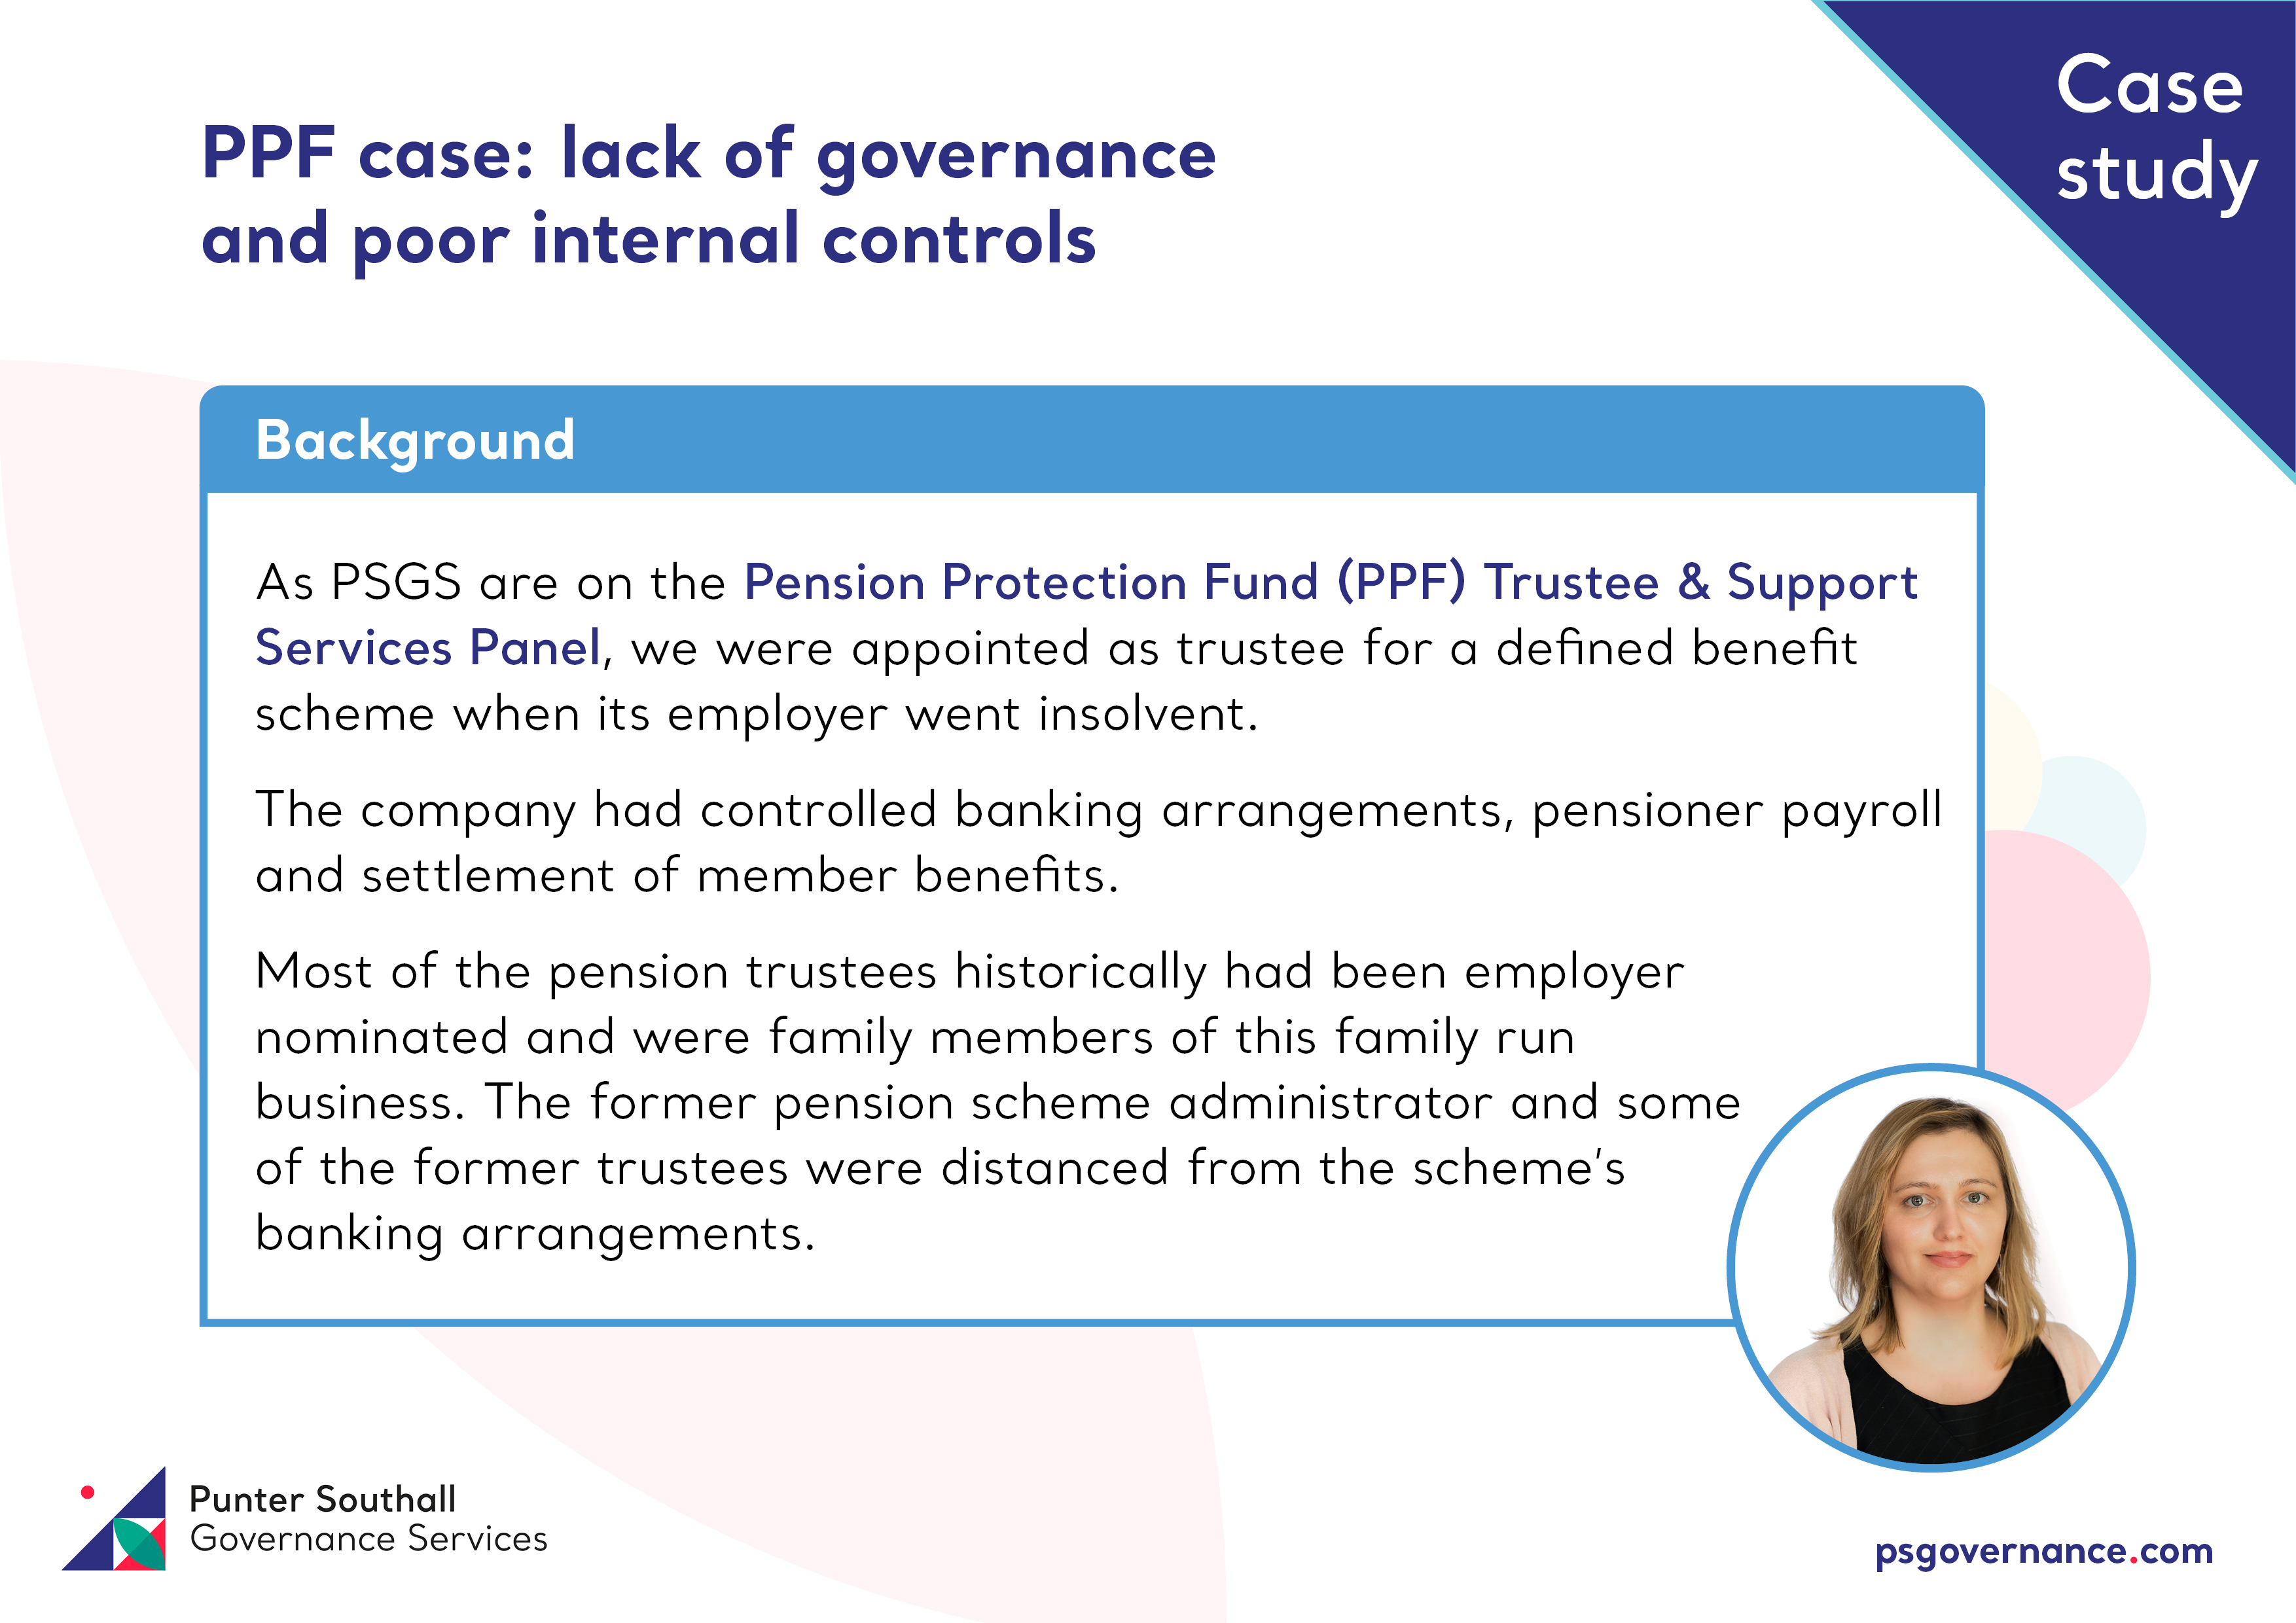 Image for opinion “PPF case: a lack of governance and poor internal controls”